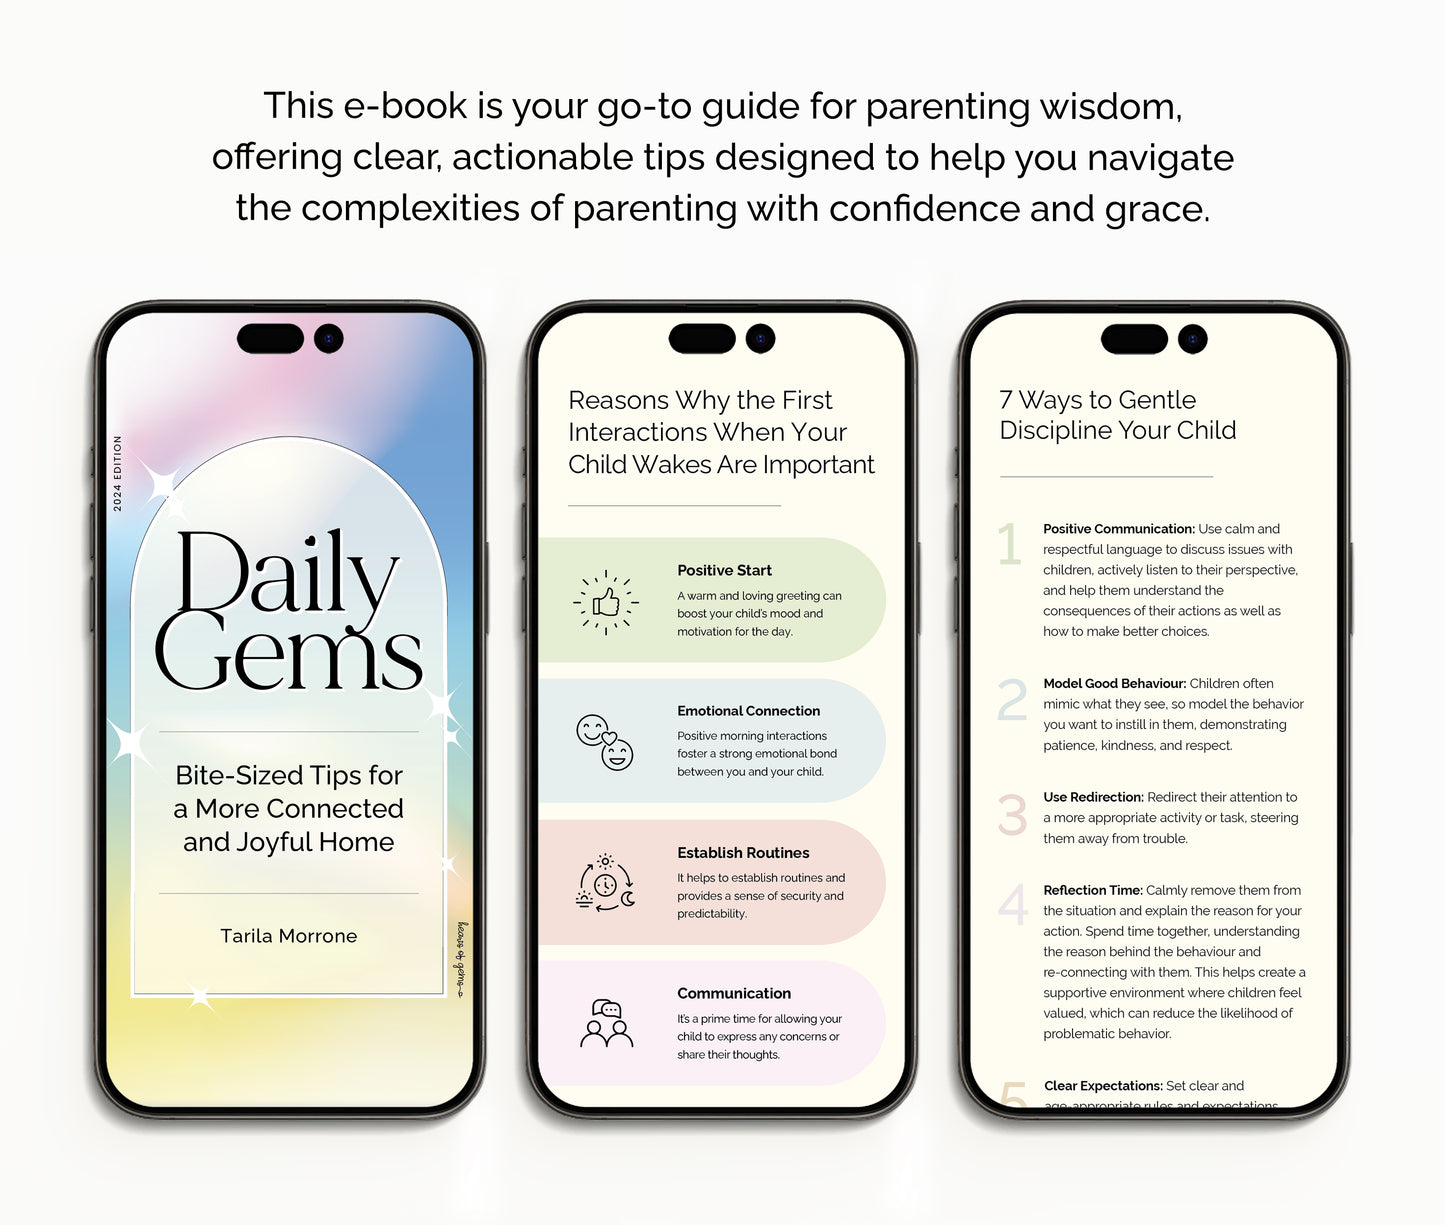 Daily Gems: Bite-Sized Tips for a More Connected and Joyful Home